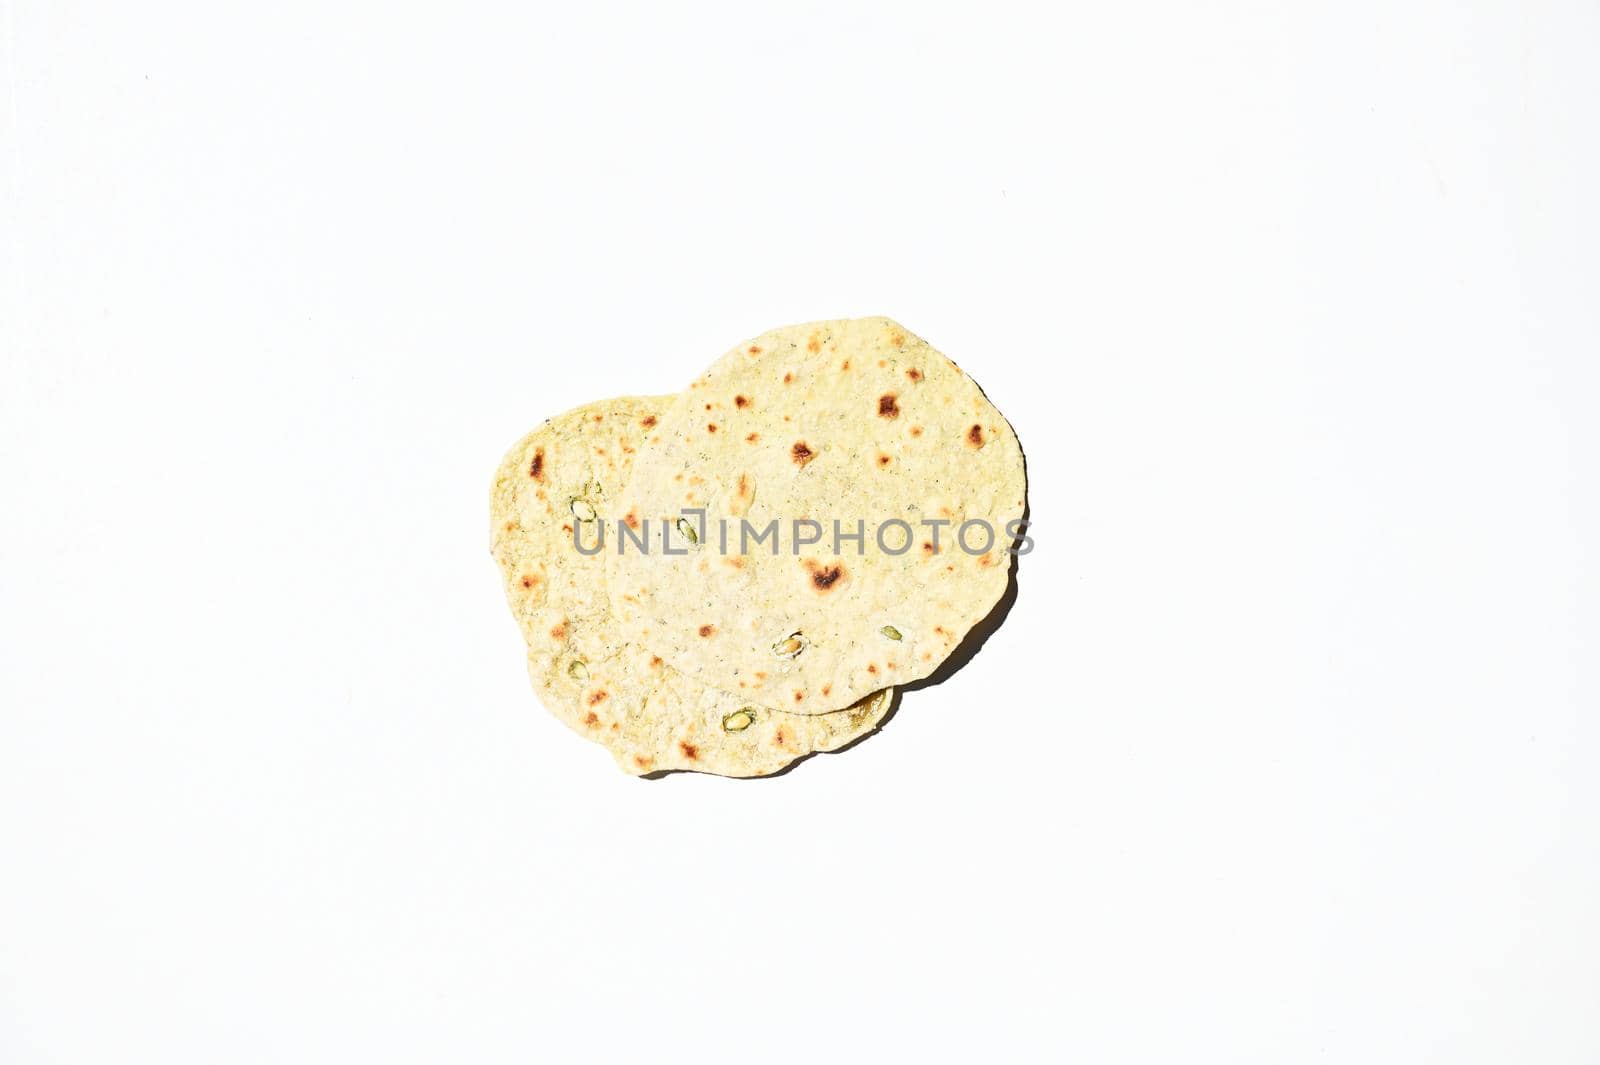 Flat lay of freshly baked homemade chapati, pita bread, flatbread, isolated over white background with copy space for advertising text. Top view, still life, food background